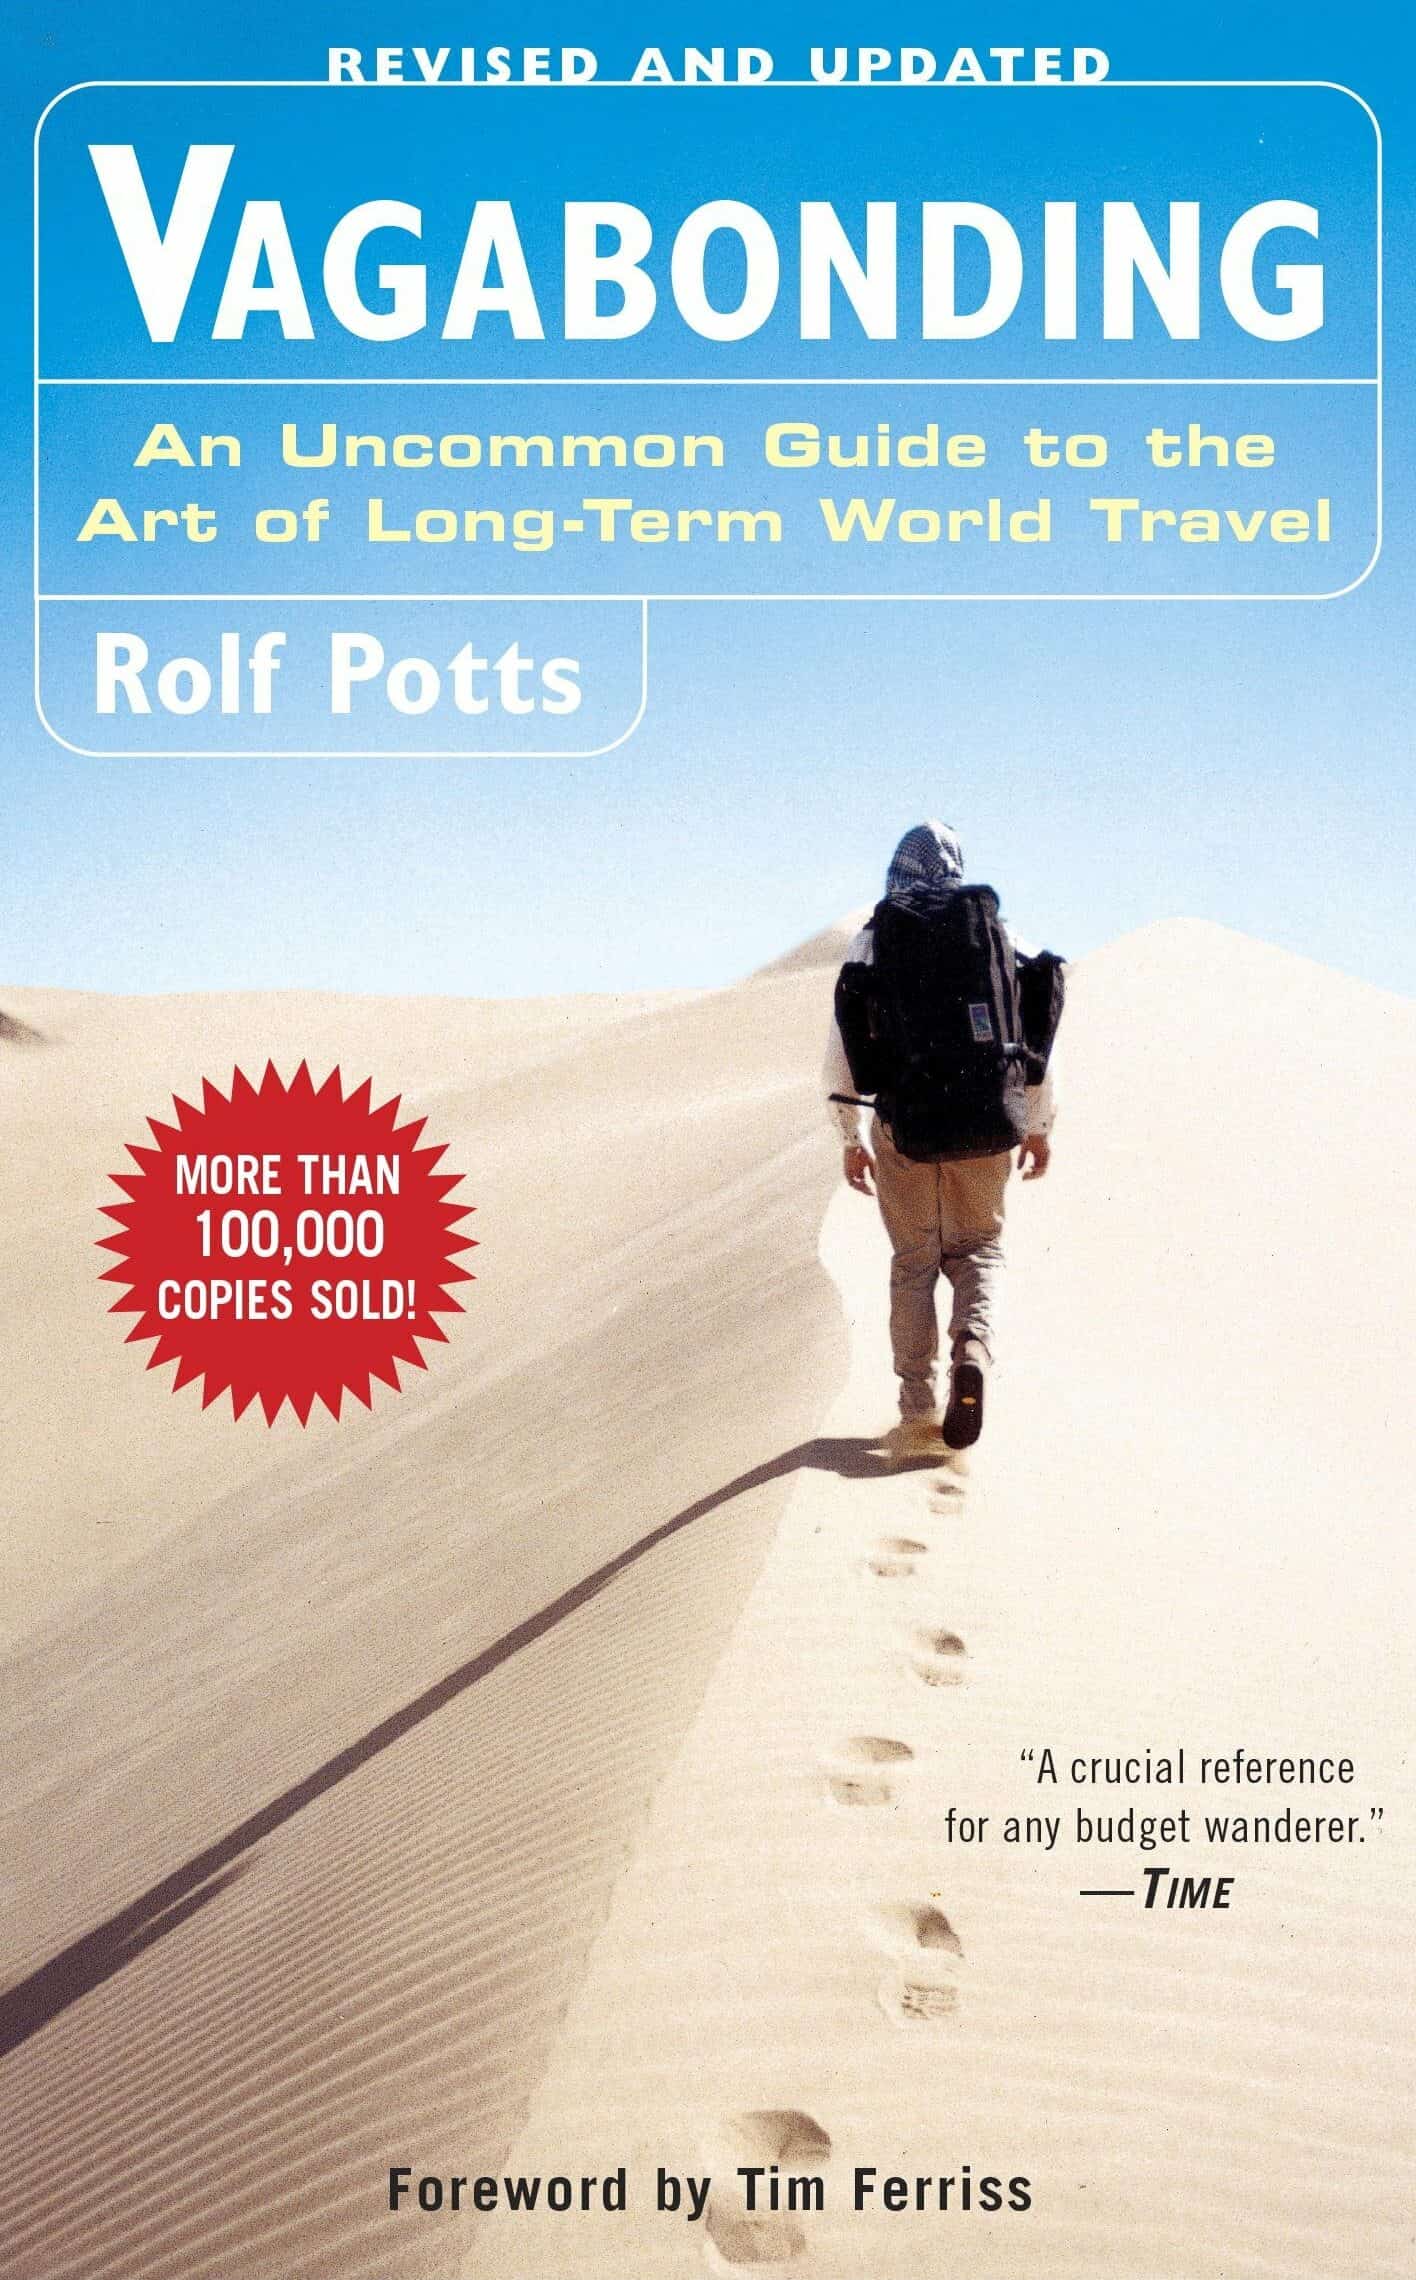 25 Books on Travel That Will Change Your Life